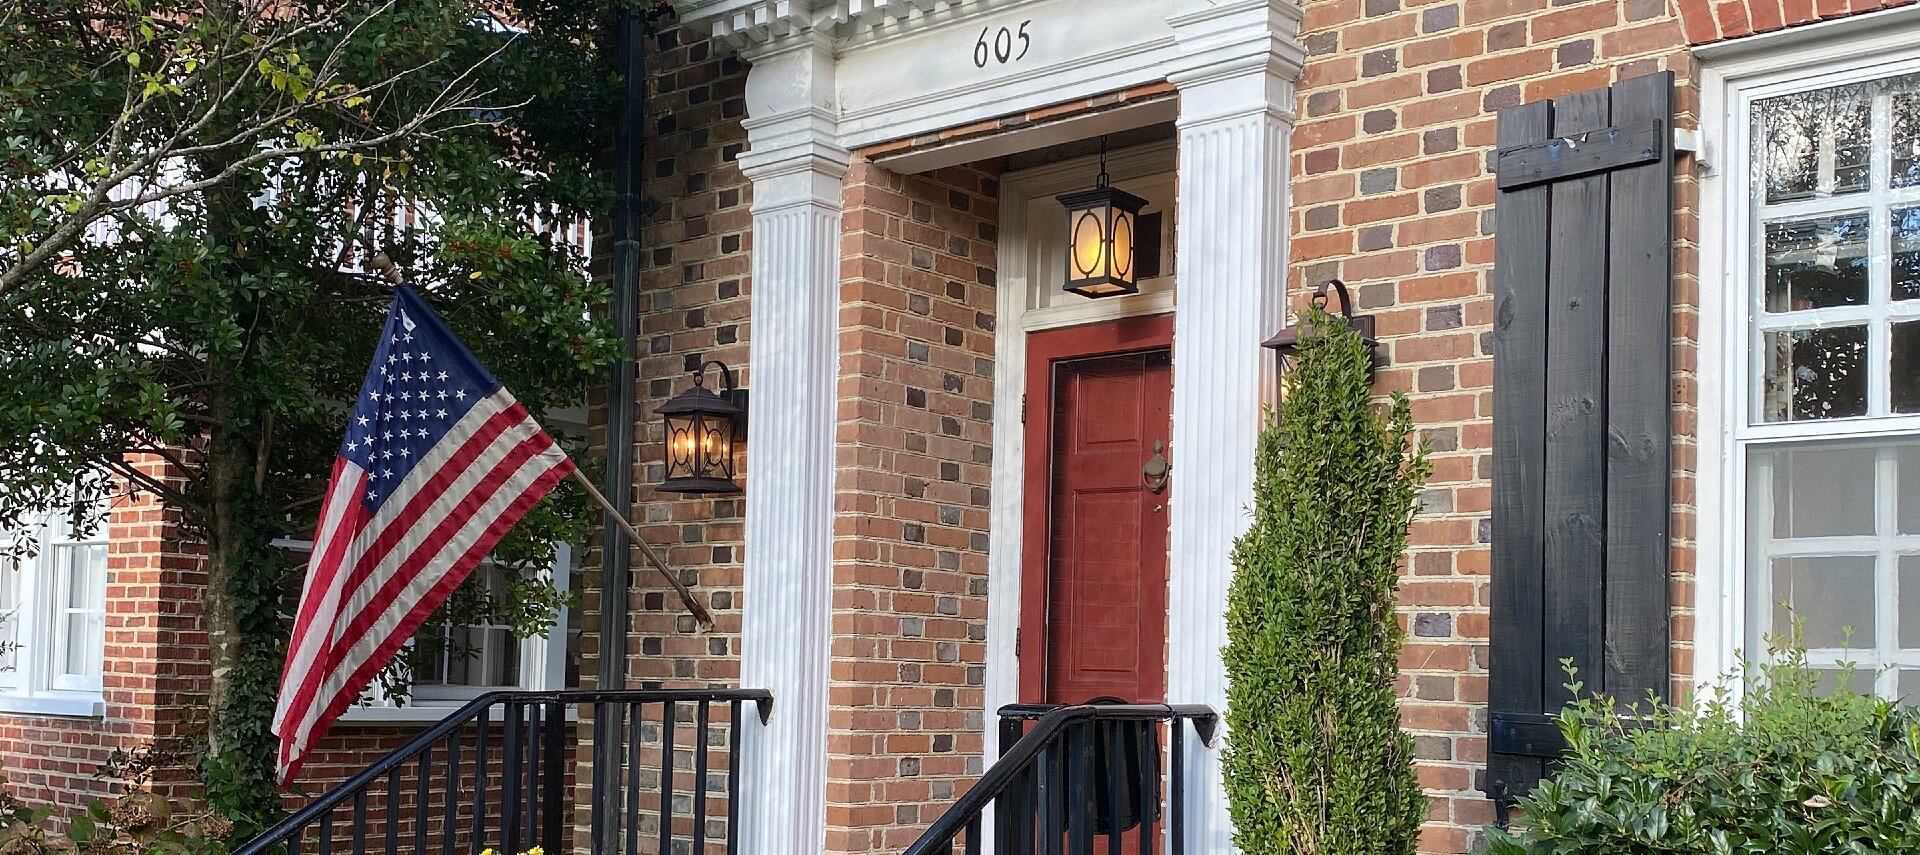 Exterior of a brick home with a red front door, black railings and an American flag on a pole